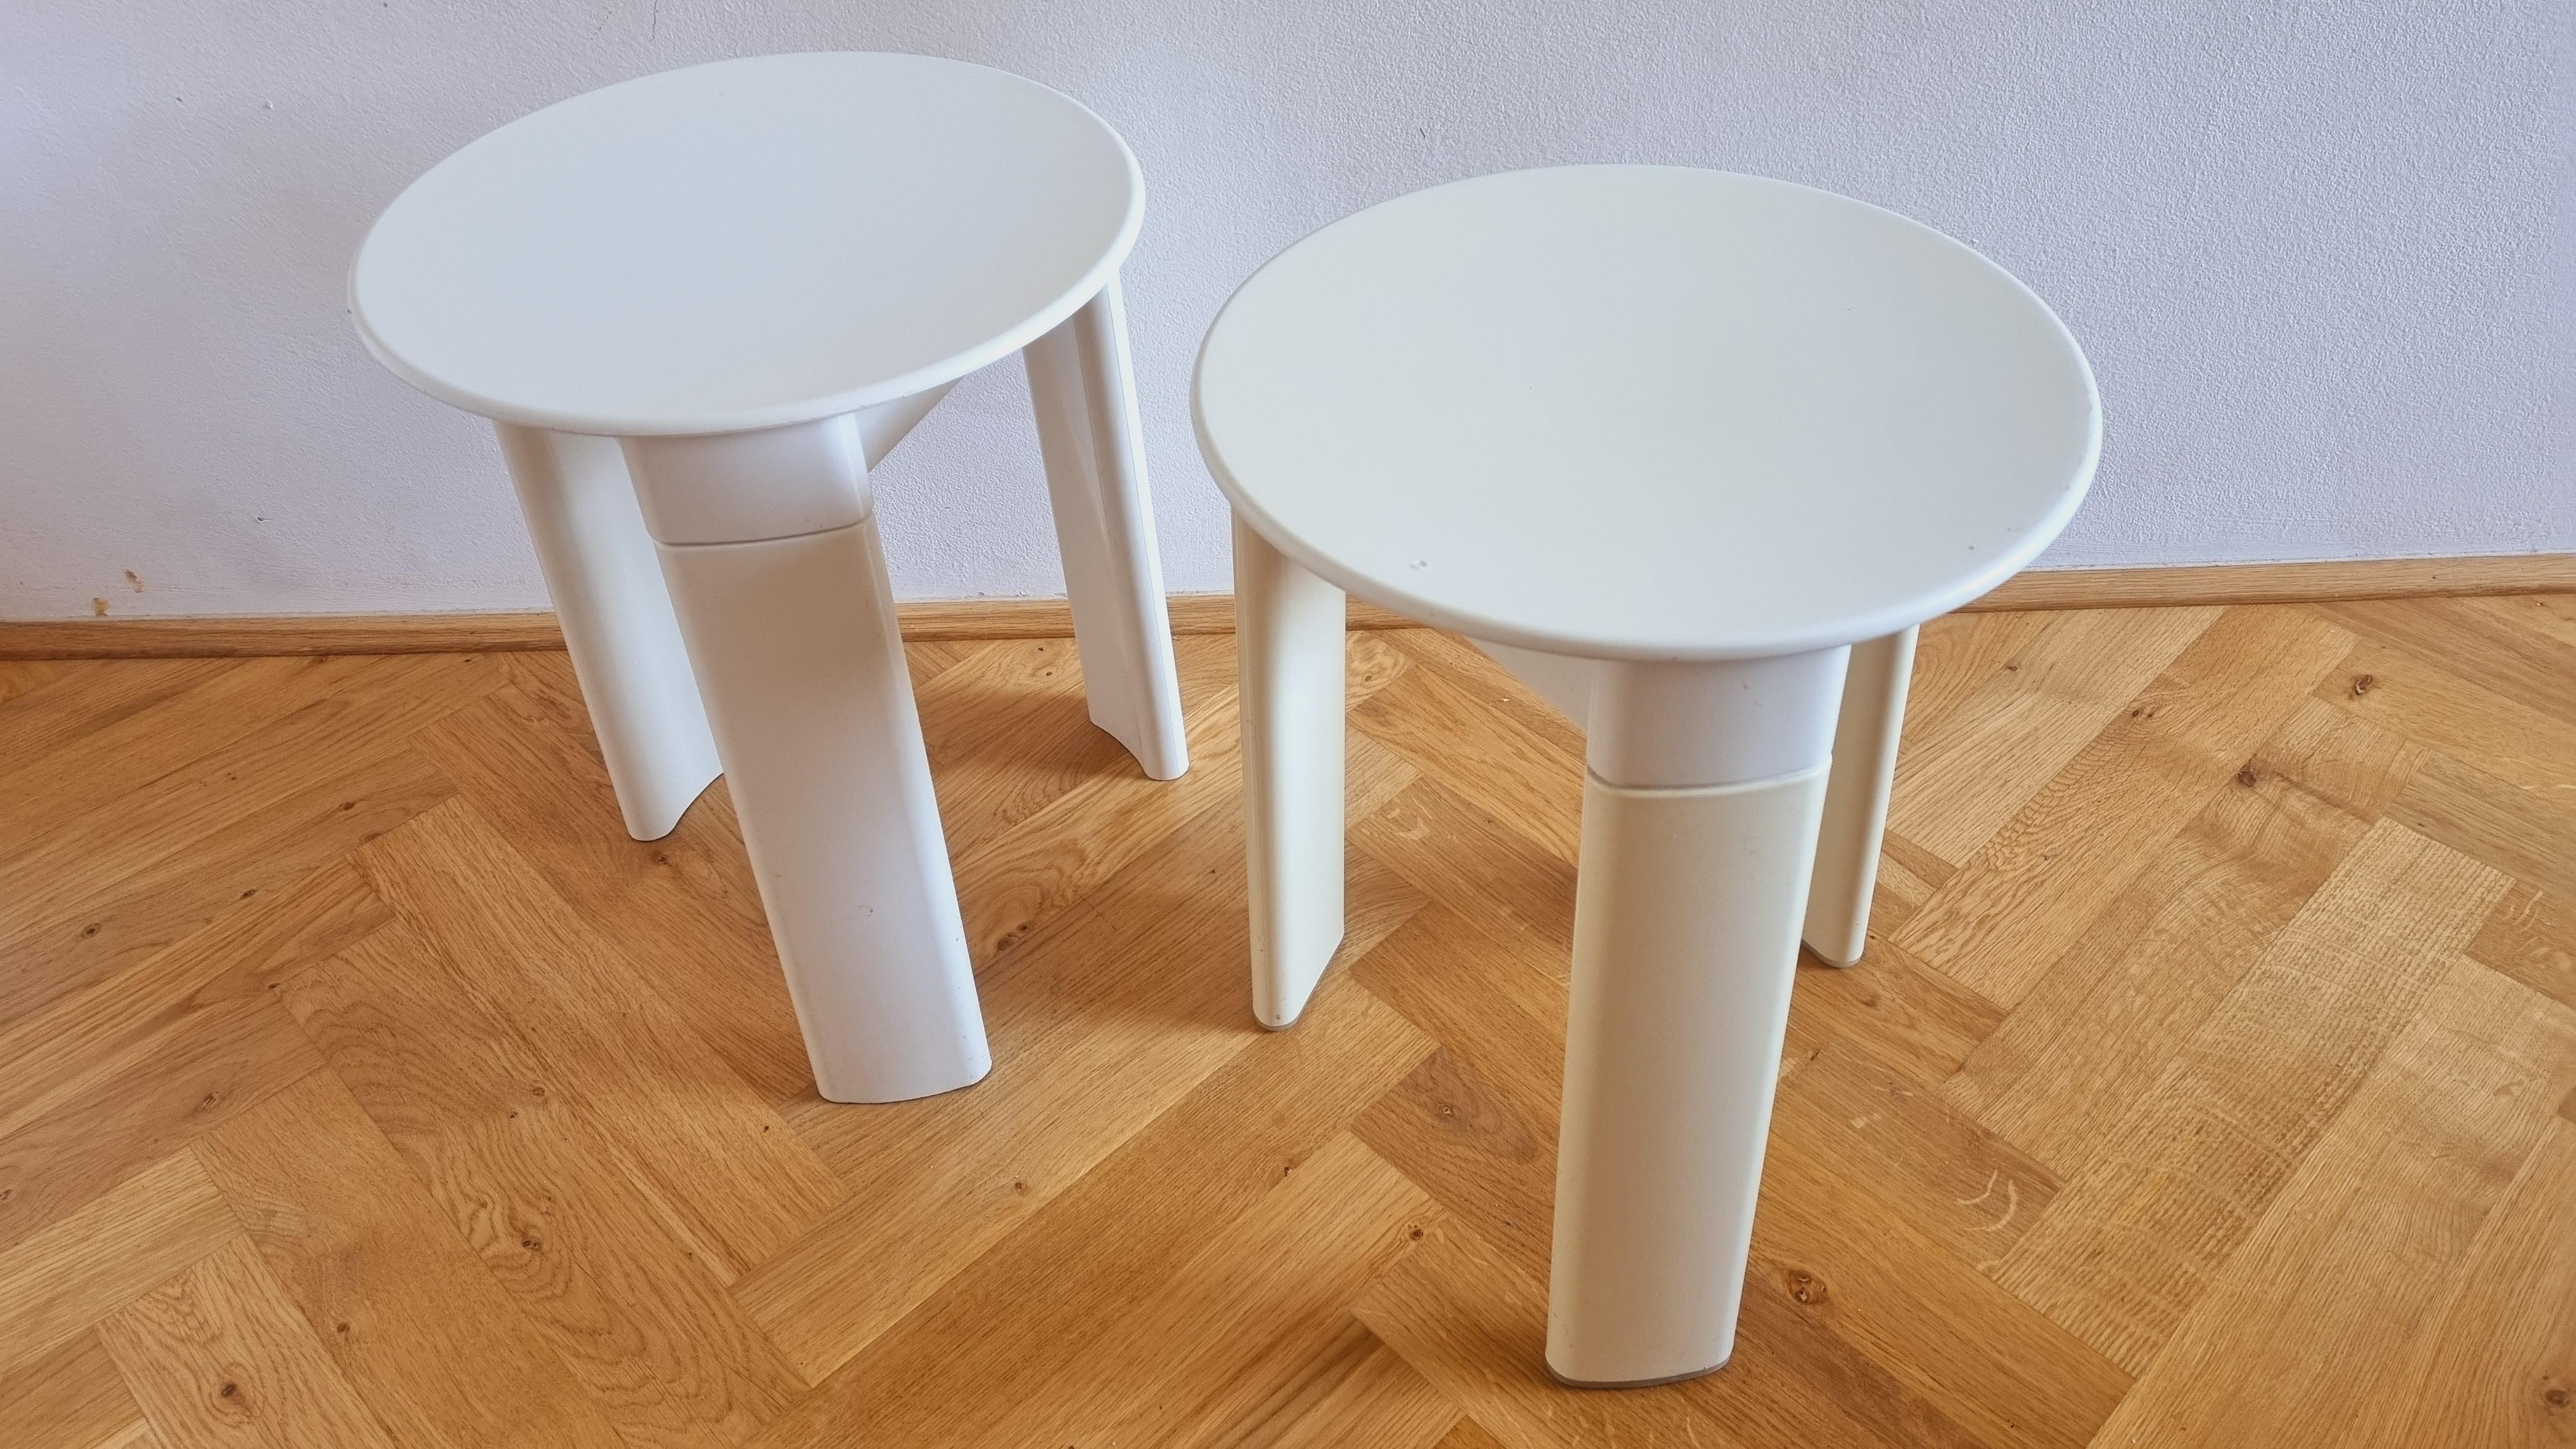 Pair of Midcentury Stools or Side Tables Trio, Olaf Von Bohr, Gedy, Italy, 1970s For Sale 4